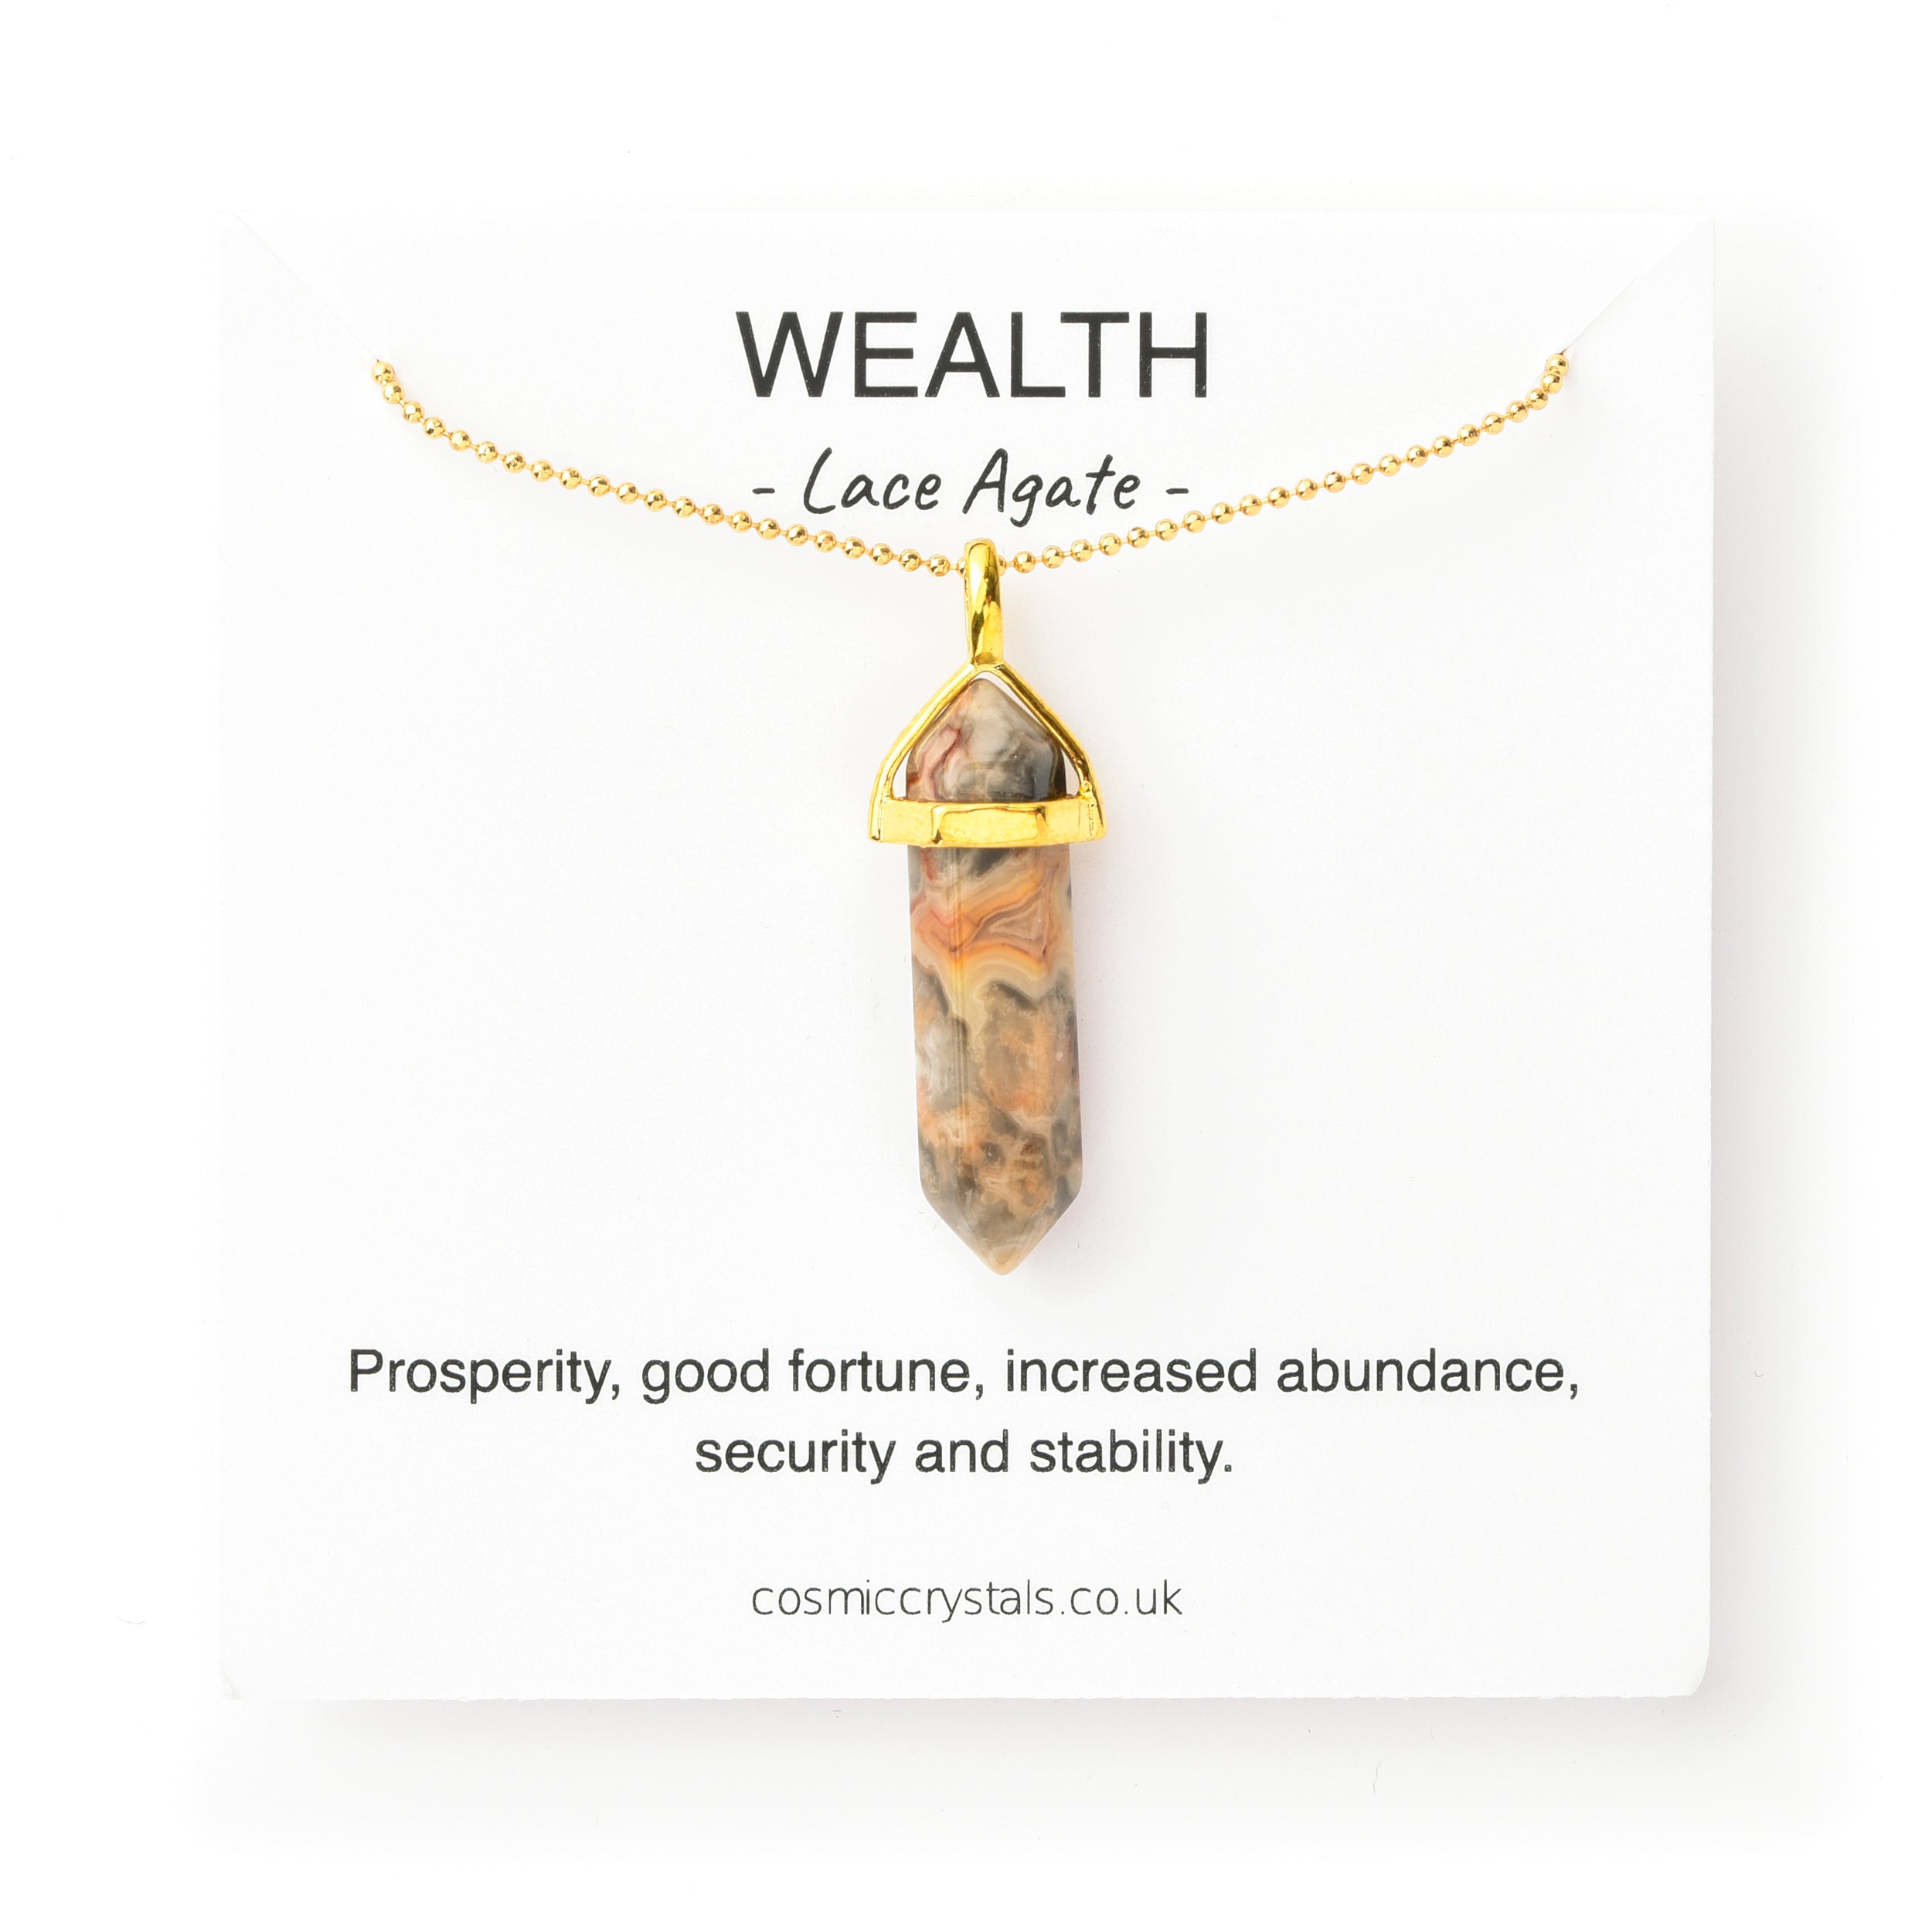 Image of Wealth Pendant, Gold Necklace, Lace Agate Crystal